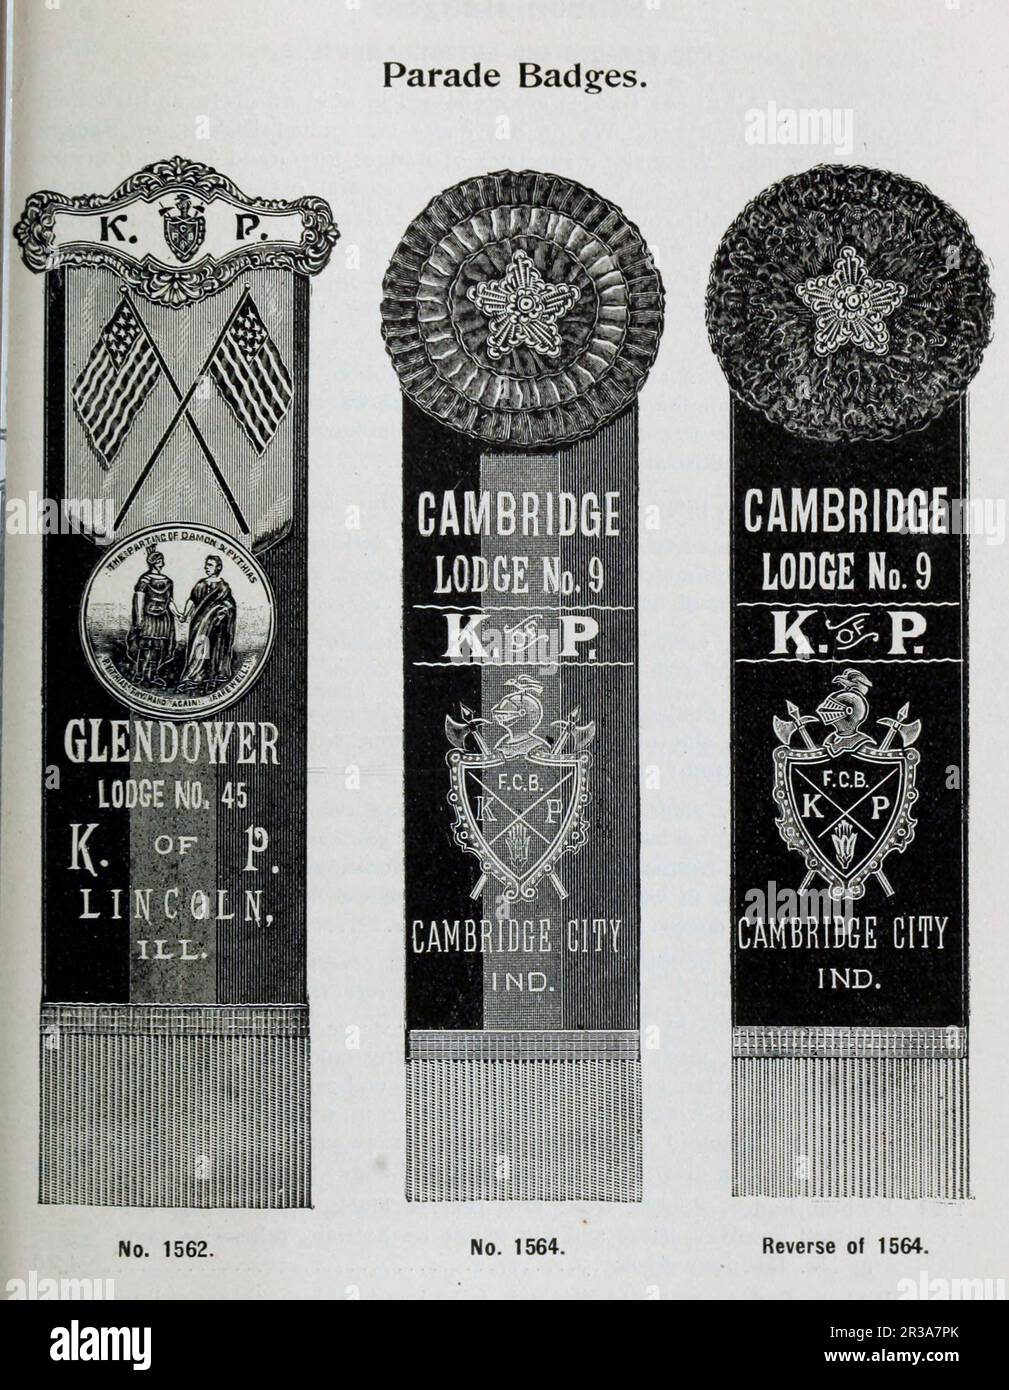 Parade Badges from the catalogue ' Illustrated catalogue and price list; Knights of Pythias lodge paraphernalia and costumes for all three ranks ' The Knights of Pythias is a fraternal organization and secret society founded in Washington, D.C., on February 19, 1864. The Knights of Pythias is the first fraternal organization to receive a charter under an act of the United States Congress. It was founded by Justus H. Rathbone, who had been inspired by a play by the Irish poet John Banim about the legend of Damon and Pythias. This legend illustrates the ideals of loyalty, honor, and friendship t Stock Photo